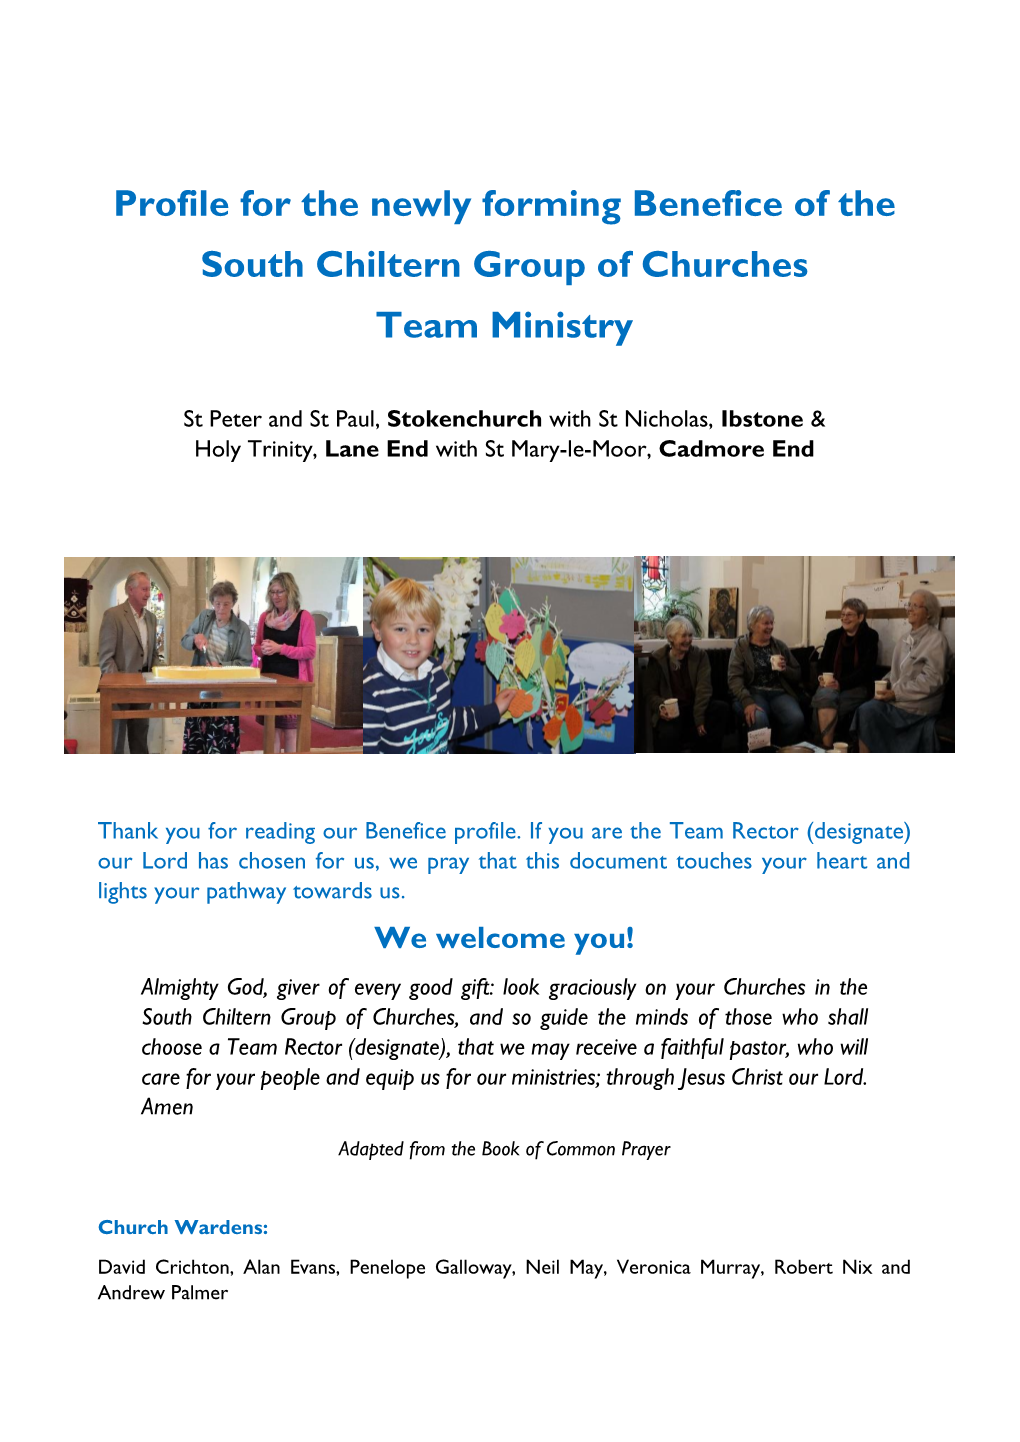 Profile for the Newly Forming Benefice of the South Chiltern Group of Churches Team Ministry